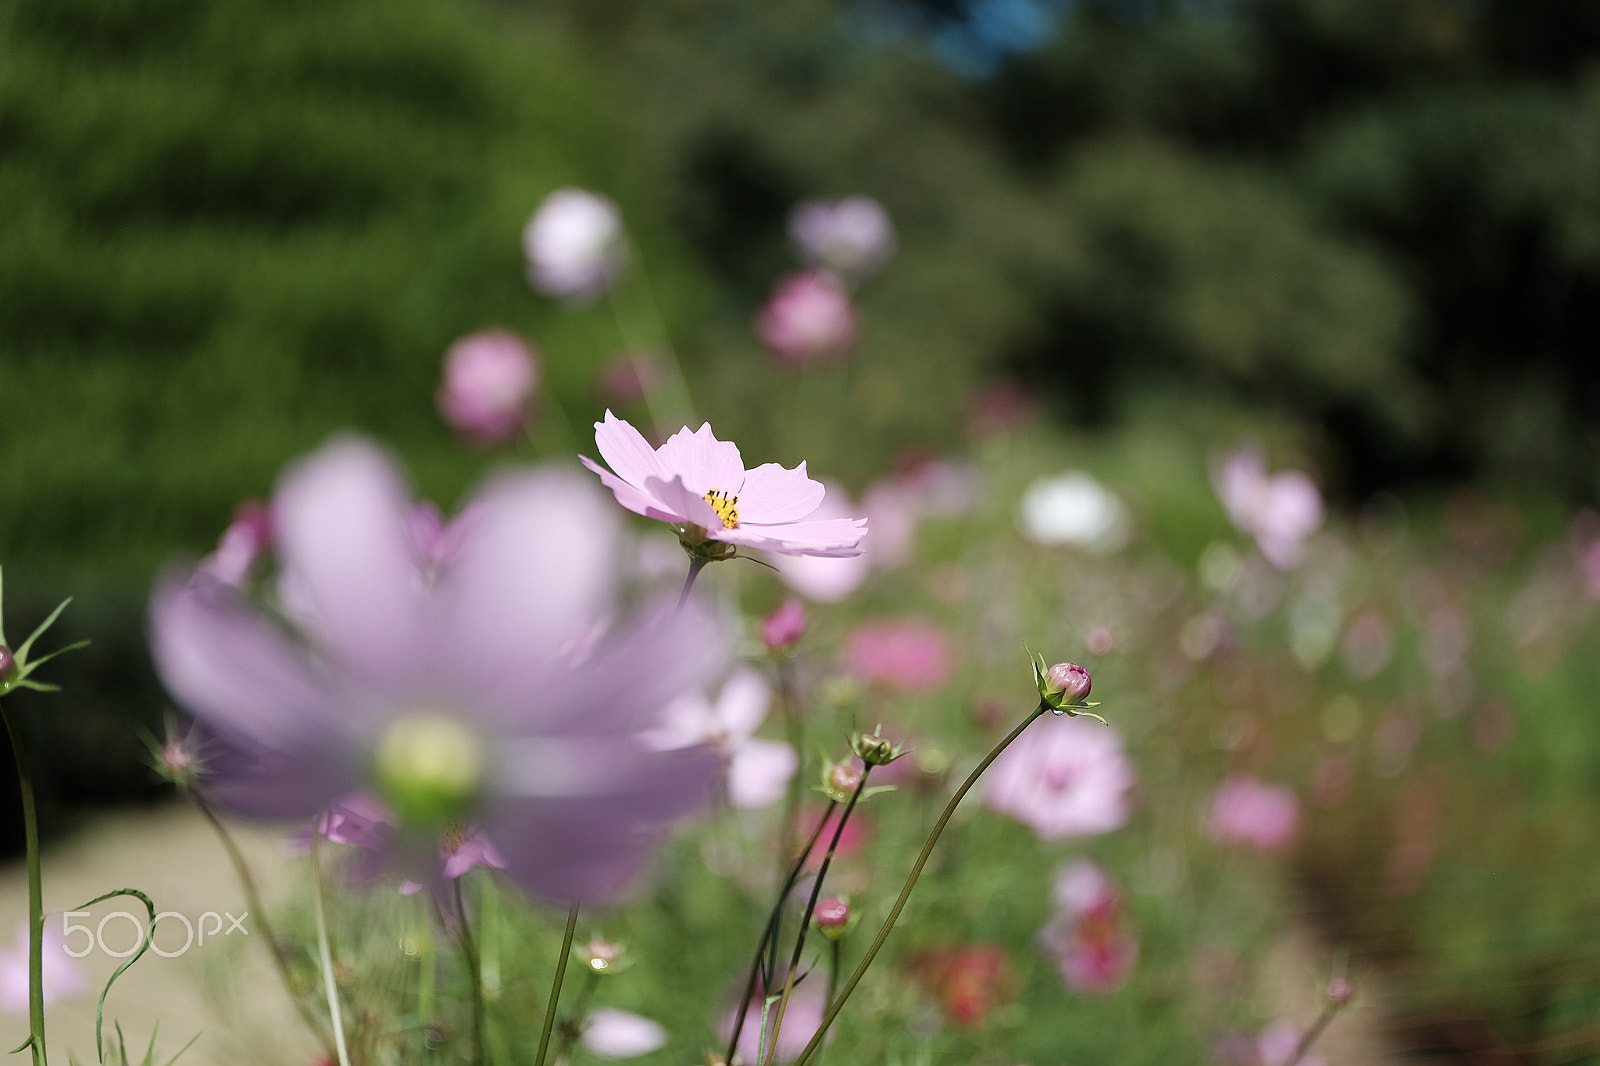 ZEISS Touit 50mm F2.8 sample photo. Autumn flowers photography